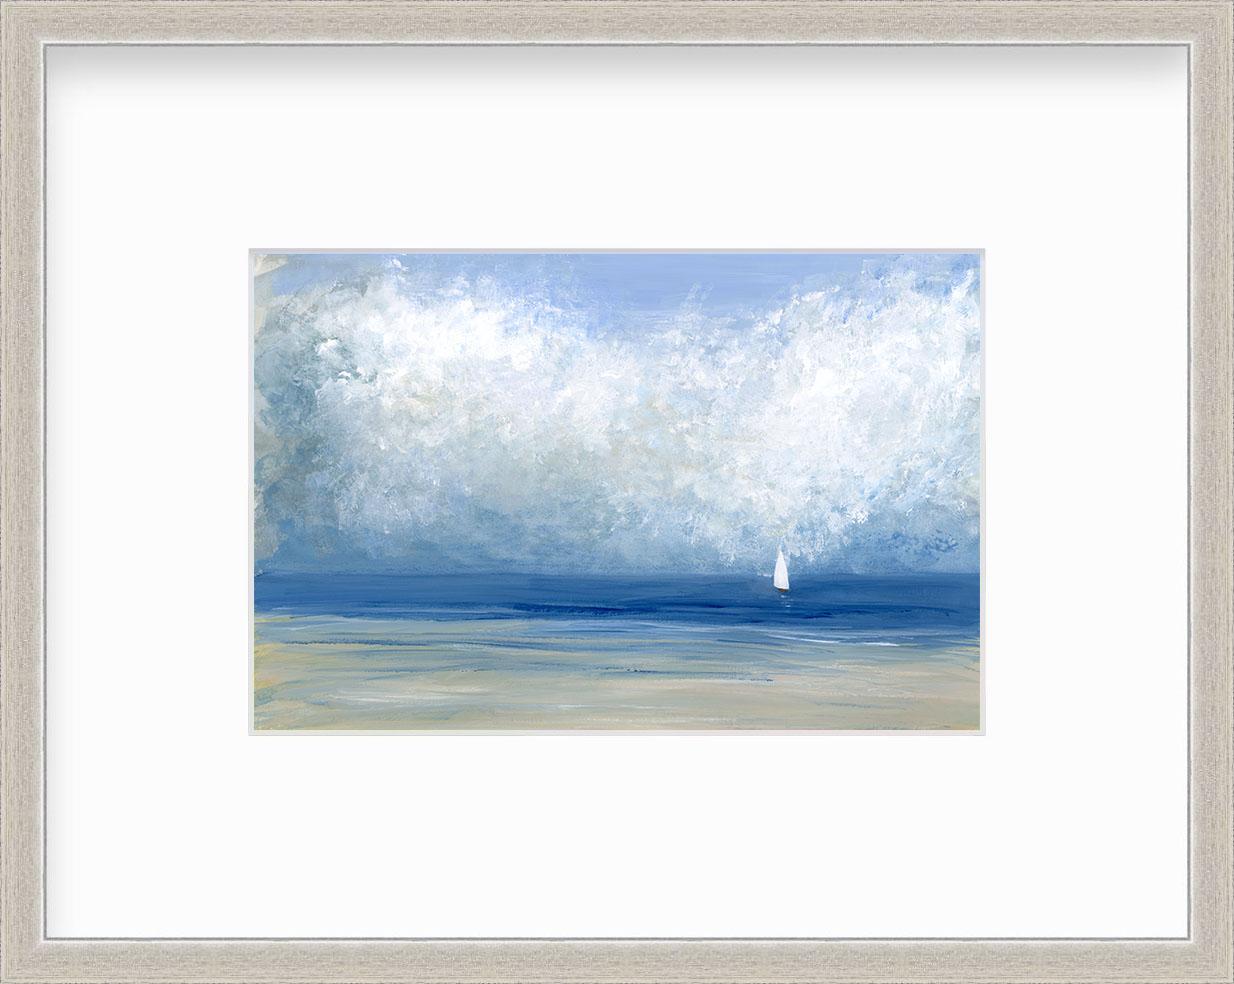 S. Cora Aldo Landscape Print - "Heading In, " Framed Limited Edition Giclee Print, 12" x 18"